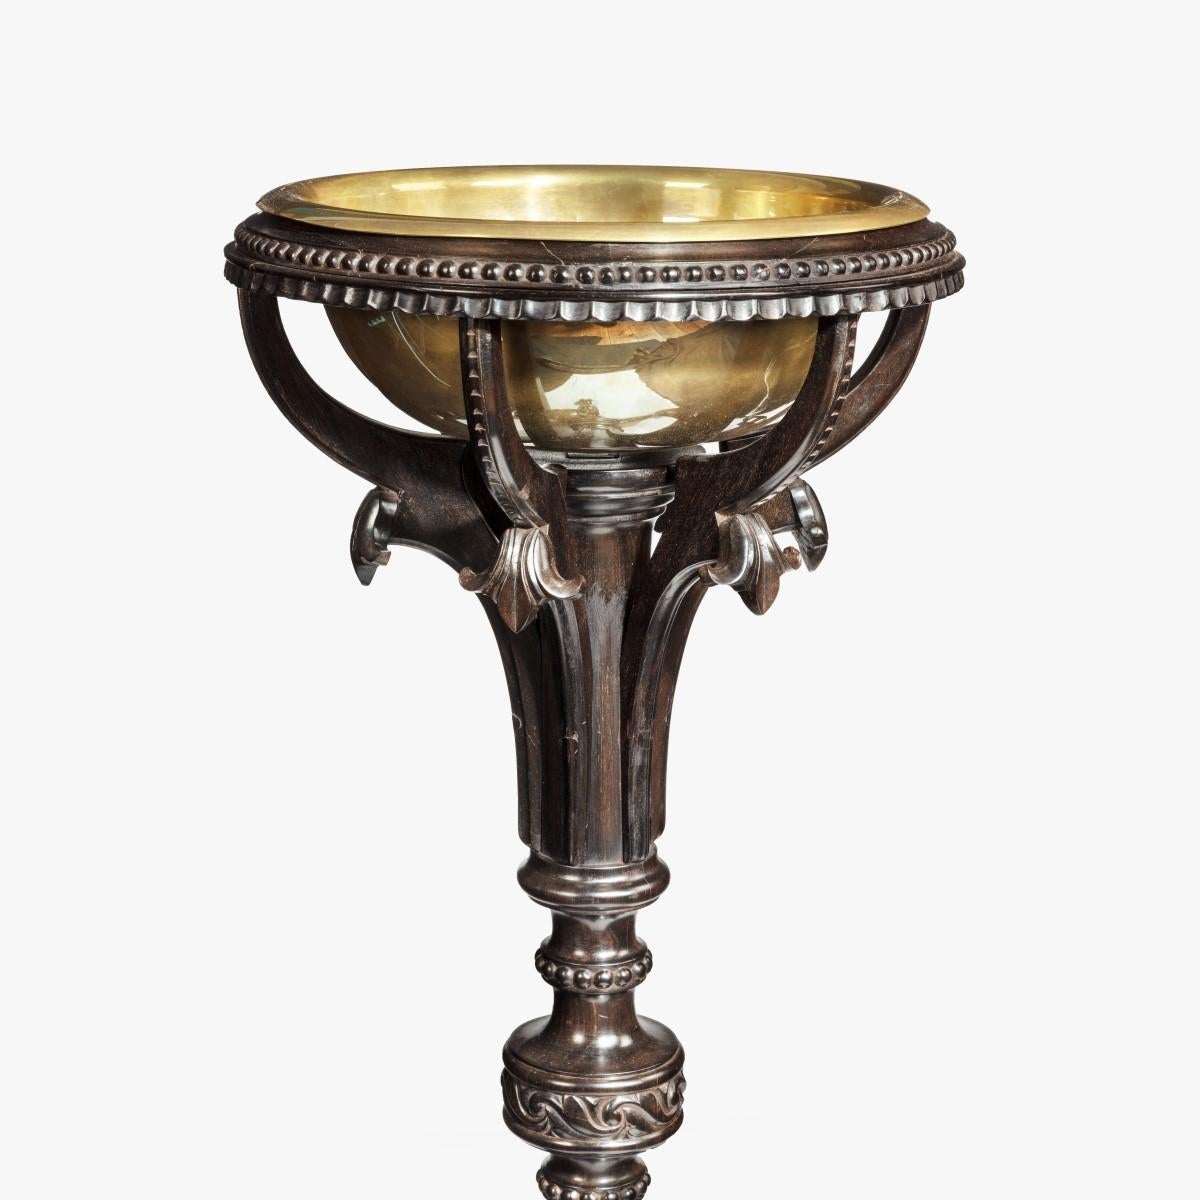 An Anglo-Indian solid ebony jardiniere, the circular brass bowl (replaced) set into an ebony tripod base with a turned, knopped support on three elephant-head feet. Indian, circa 1830.